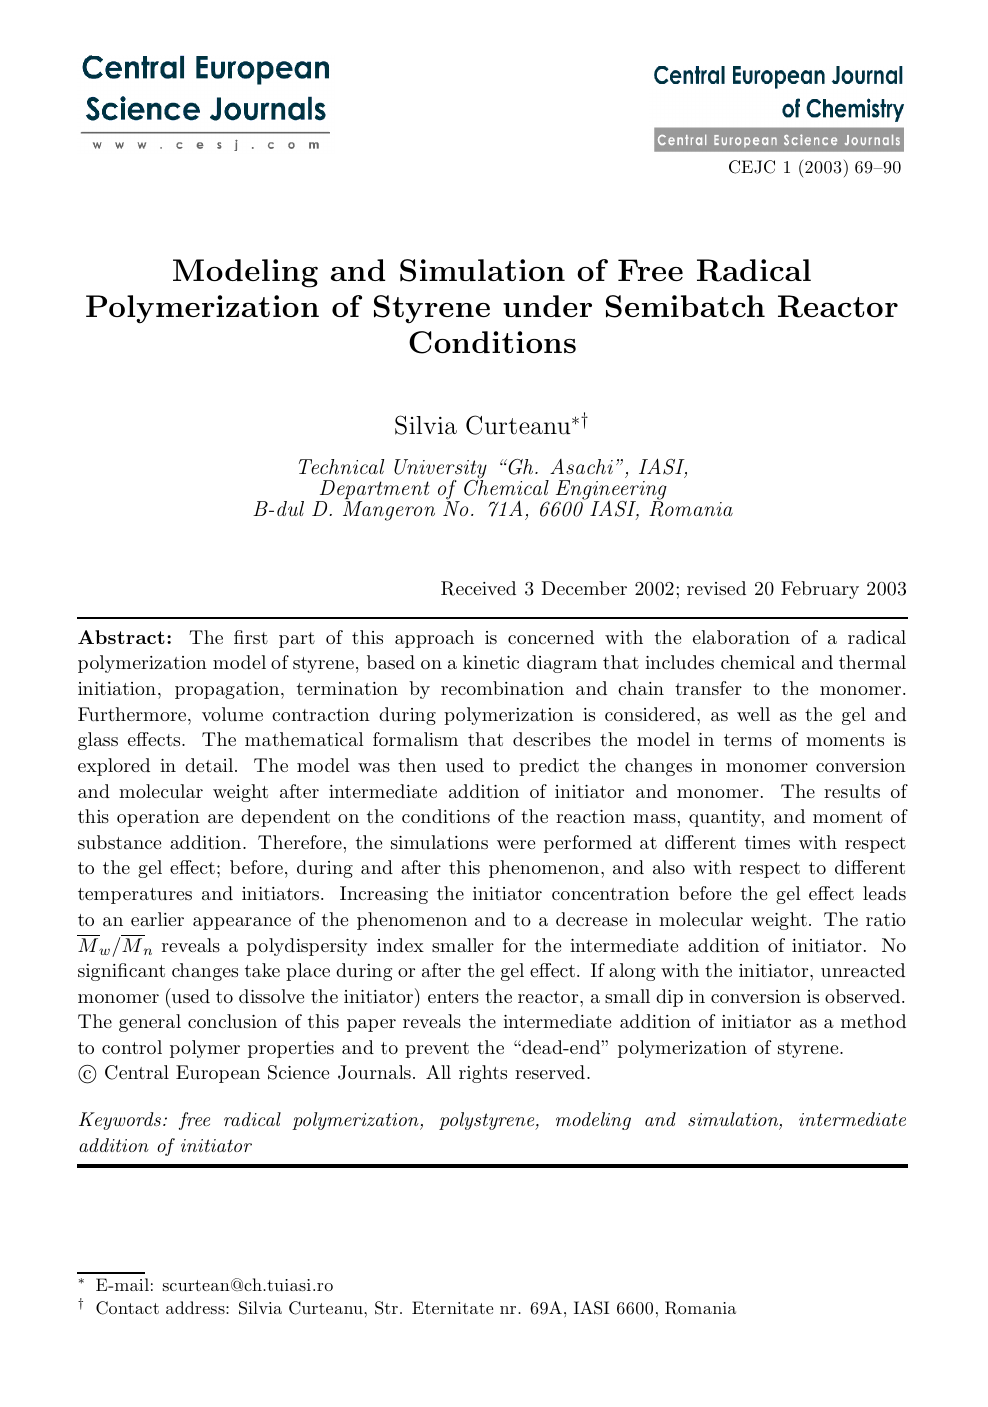 Modeling And Simulation Of Free Radical Polymerization Of Styrene Under Semibatch Reactor Conditions Topic Of Research Paper In Chemical Sciences Download Scholarly Article Pdf And Read For Free On Cyberleninka Open